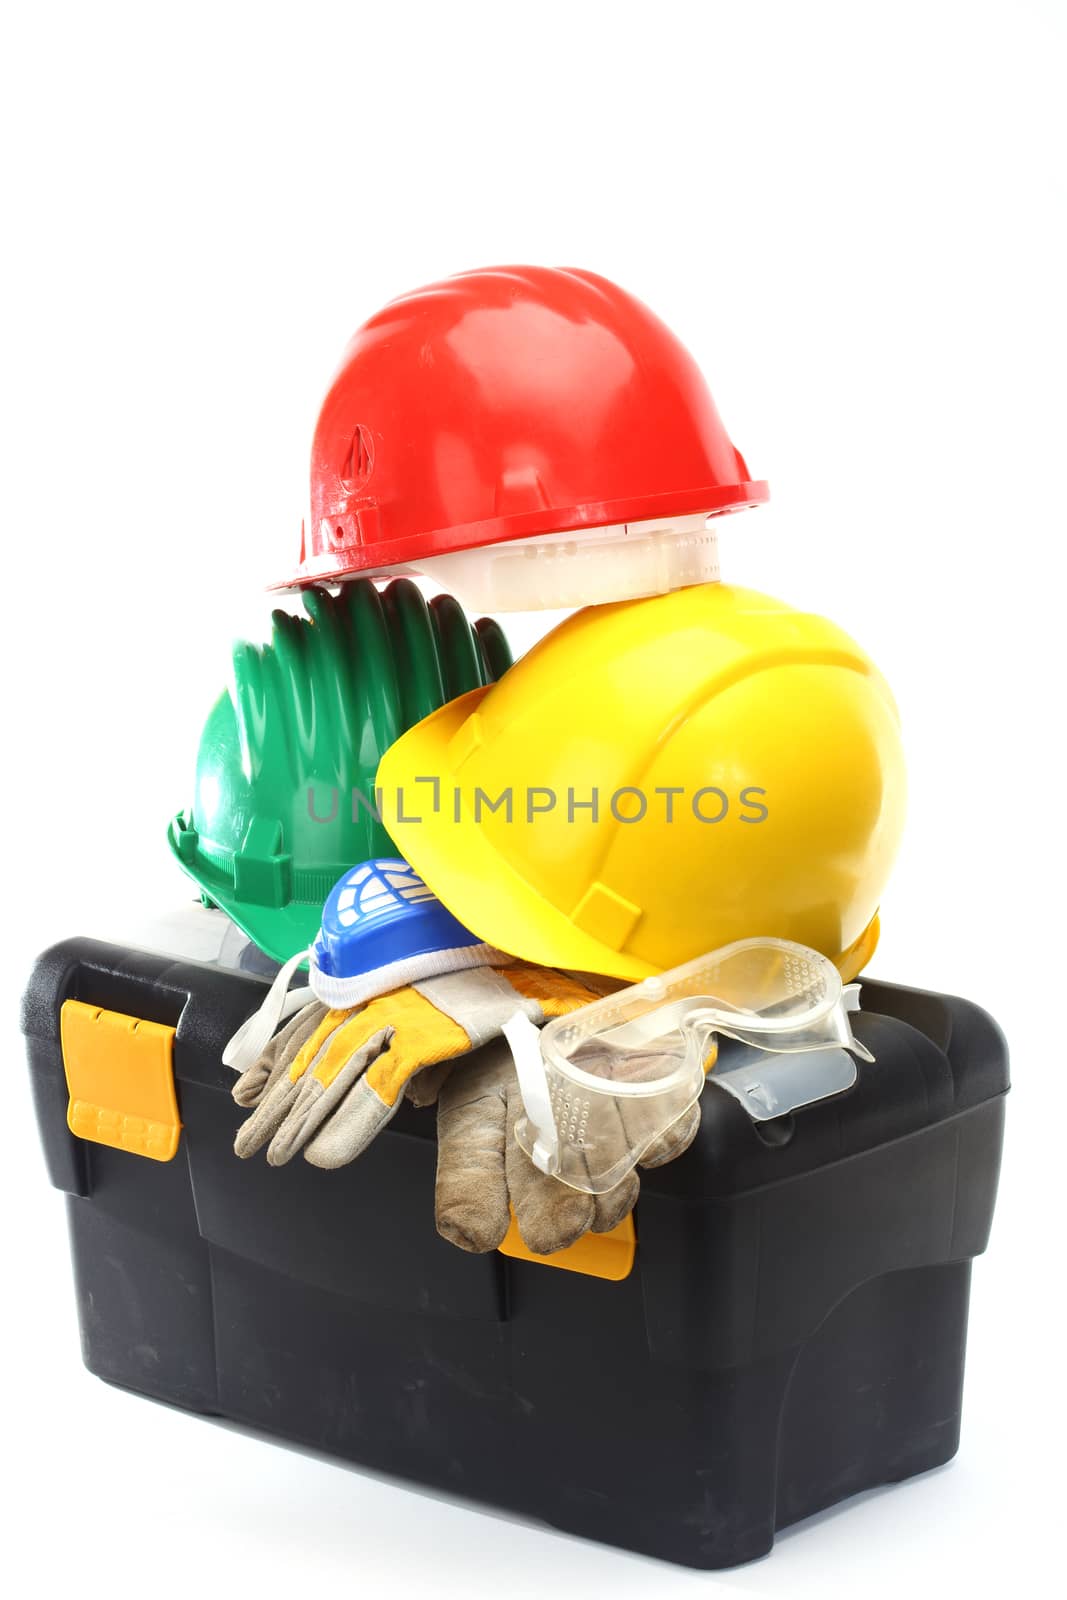 Some color protective helmets and toolbox on white 